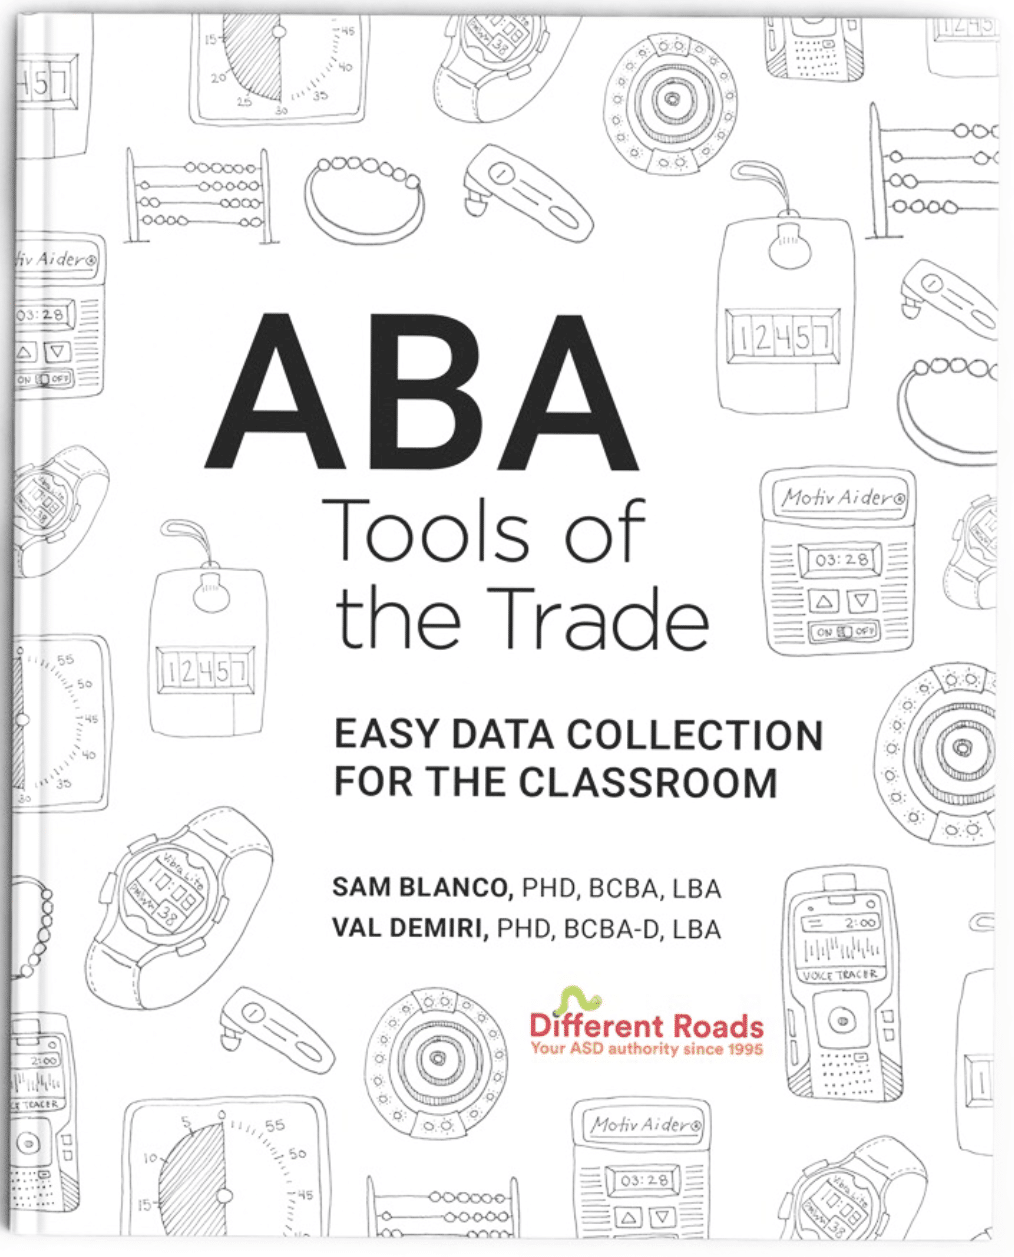 A review of ABA Tools of the Trade